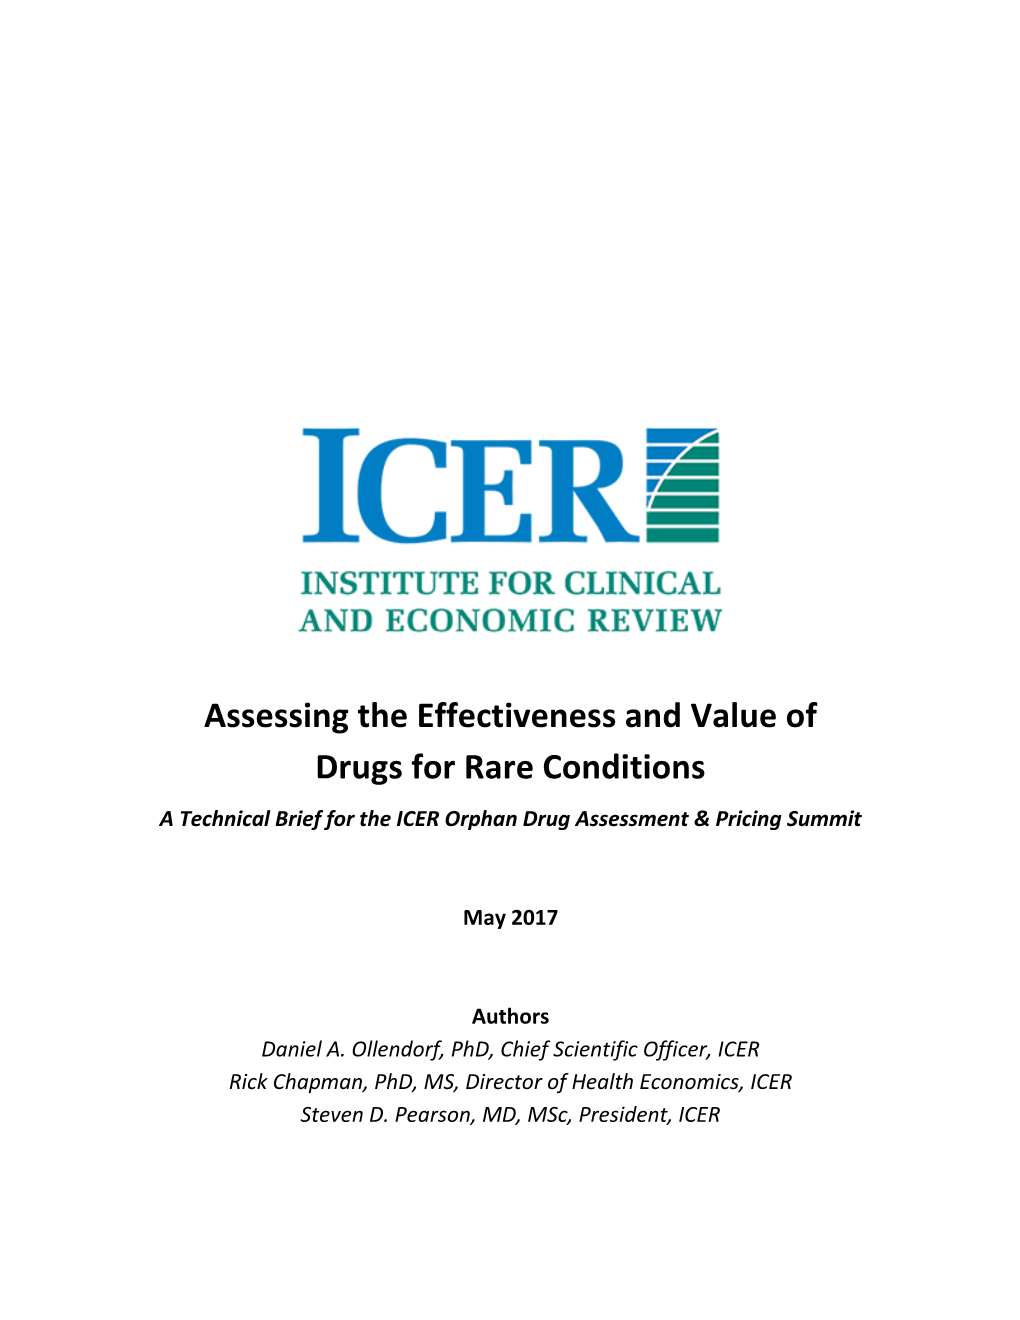 Assessing the Effectiveness and Value of Drugs for Rare Conditions a Technical Brief for the ICER Orphan Drug Assessment & Pricing Summit